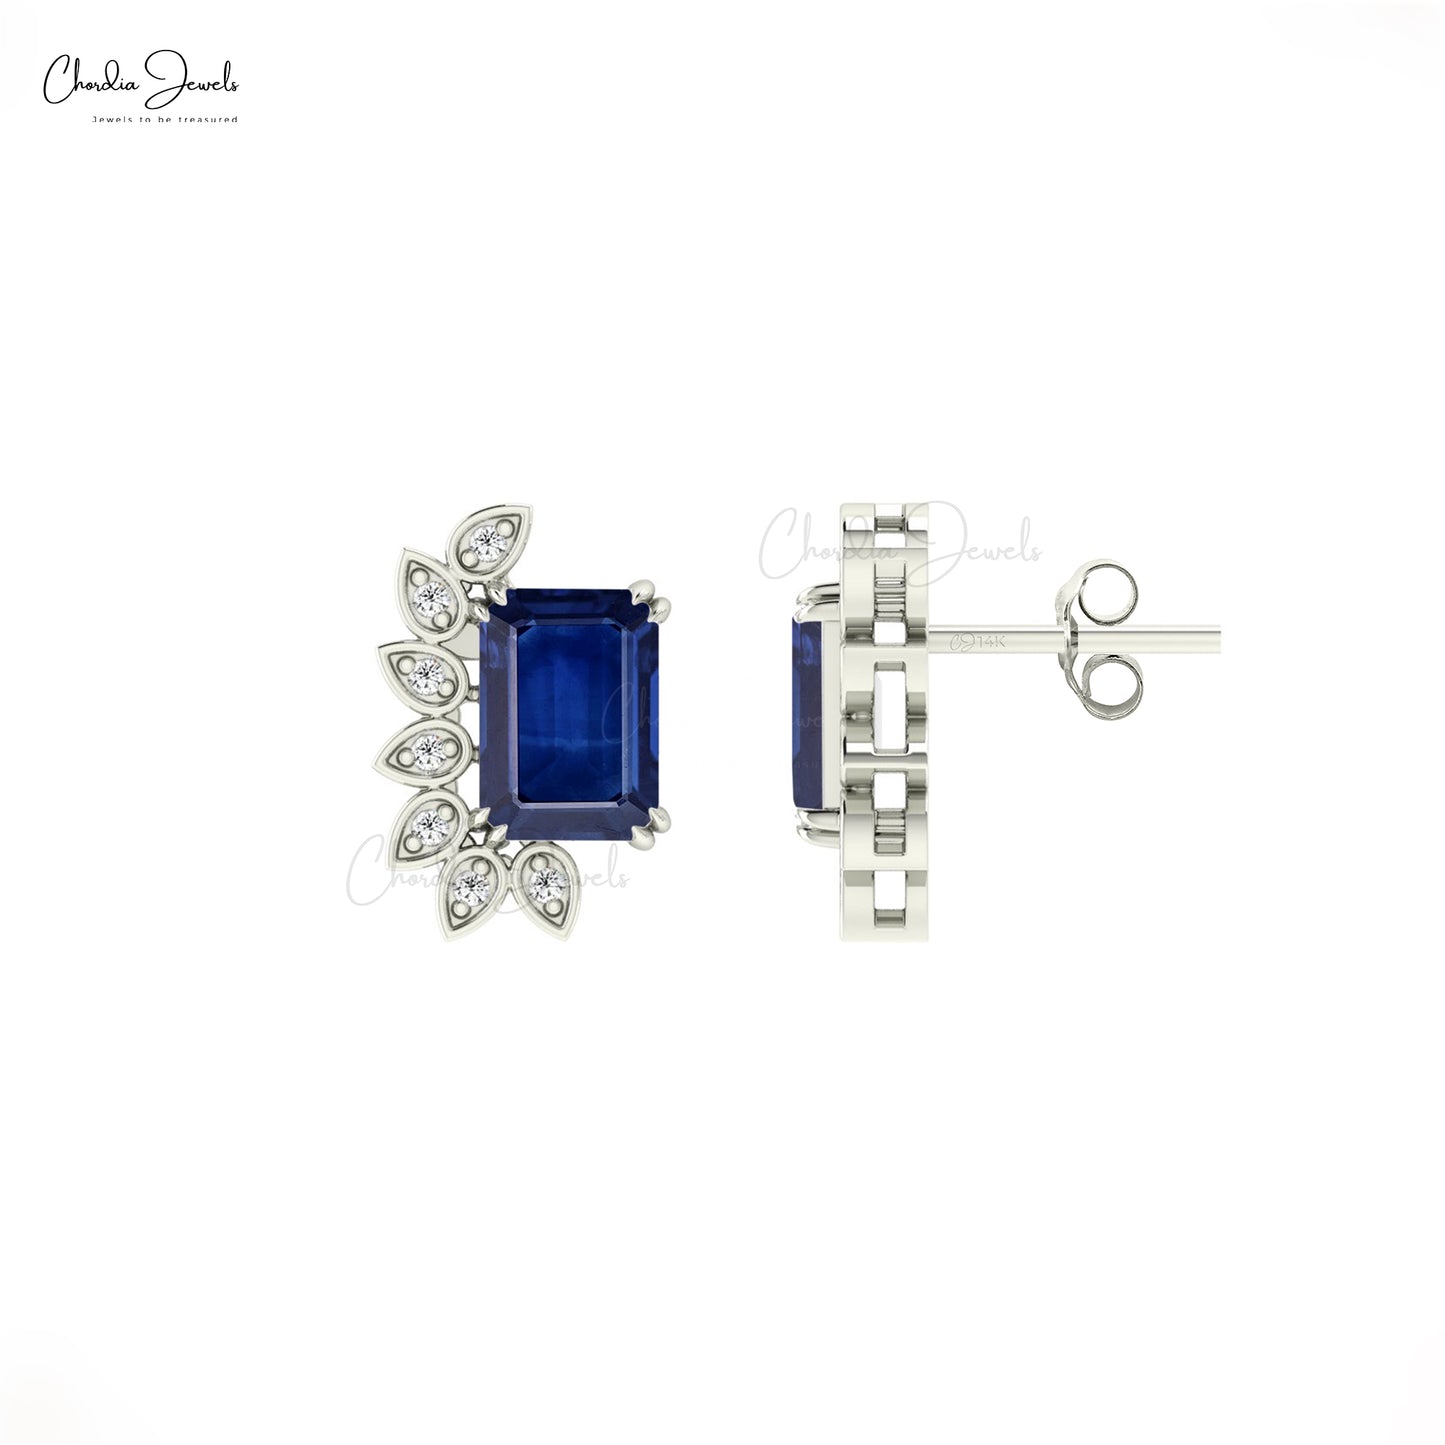 Statement Earrings With Blue Sapphire Gemstone 14k Solid Gold Diamond Accents Stud Earring